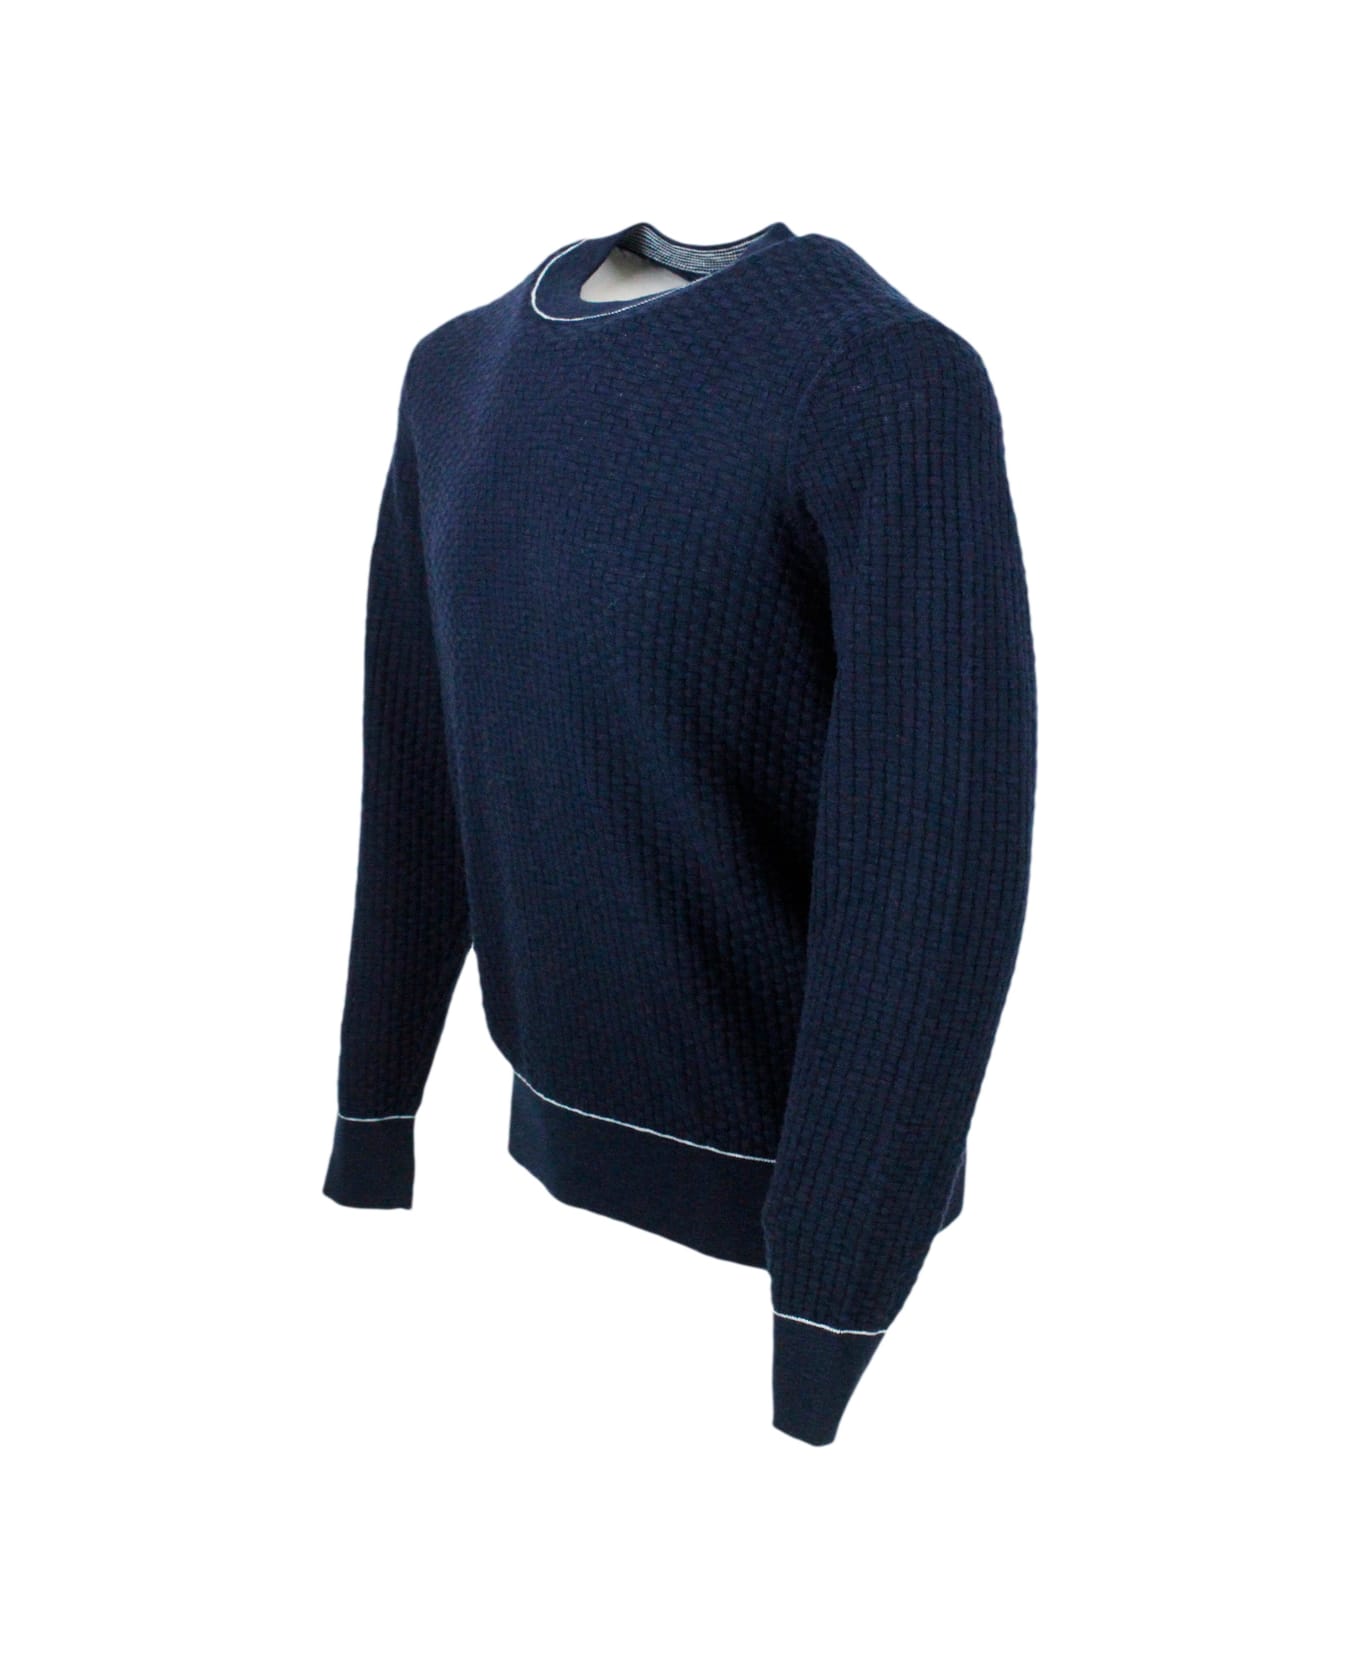 Armani Collezioni Crew-neck And Long-sleeved Sweater In Cotton And Linen With Honeycomb Workmanship. - Blu